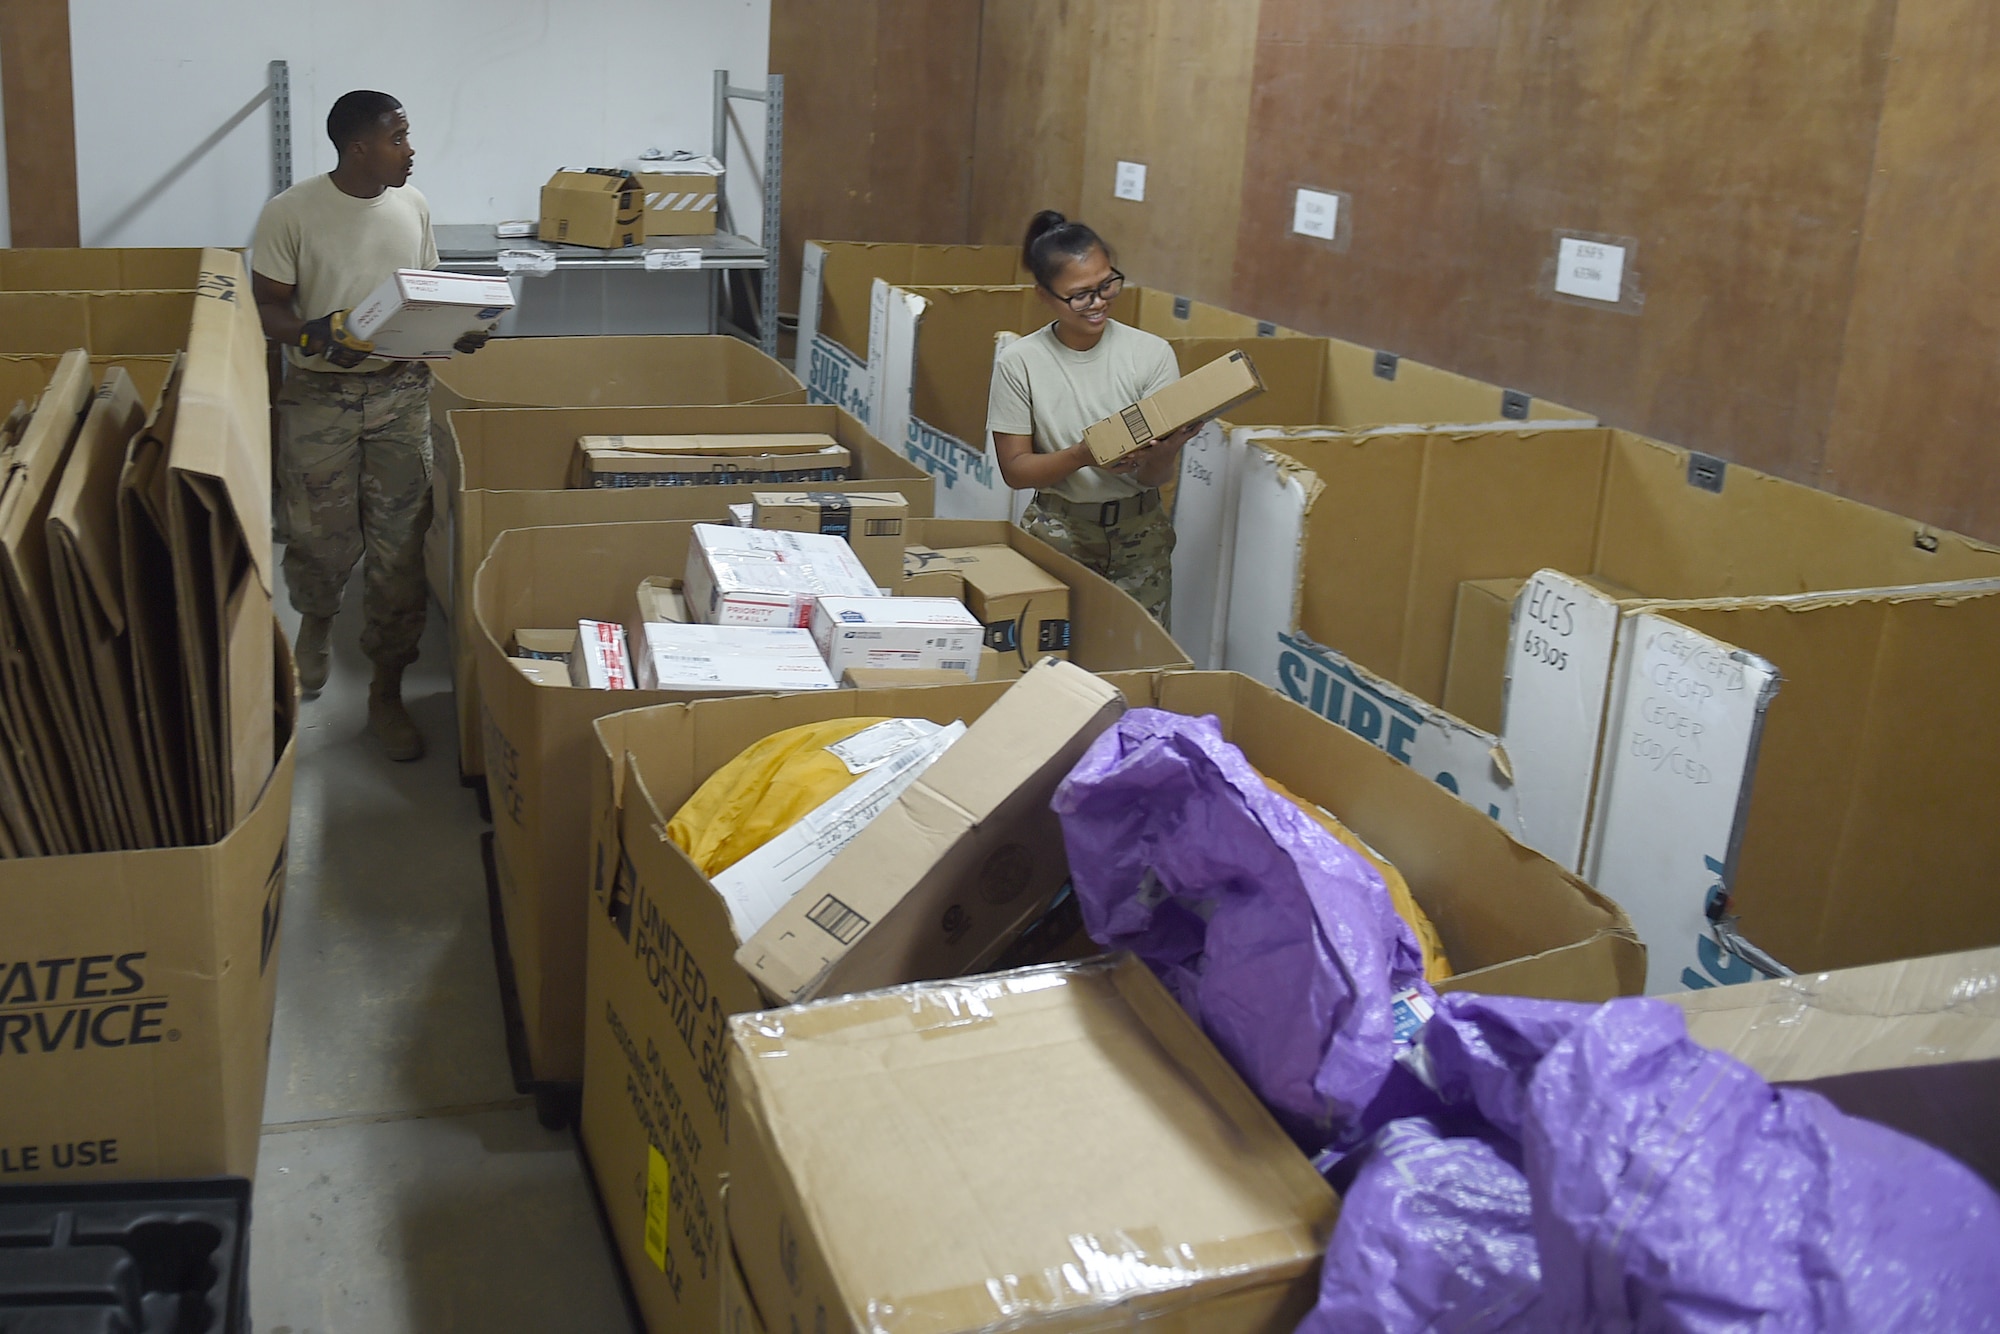 Two Airmen sort through big boxes of mail